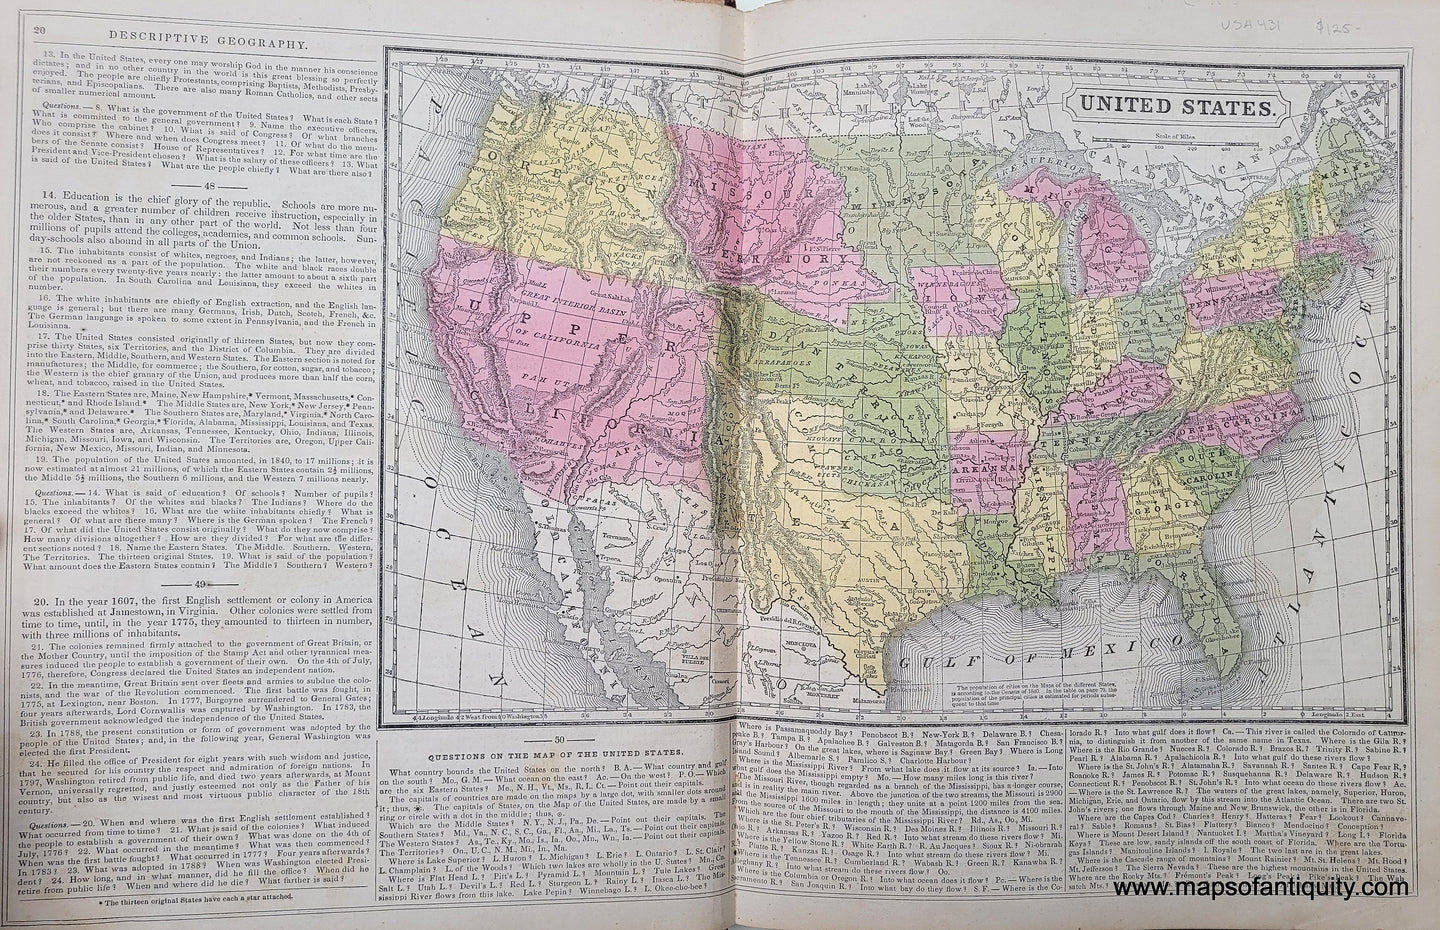 Genuine-Antique-Hand-Colored-Map-United-States-1850-Mitchell-Thomas-Cowperthwait-Co--Maps-Of-Antiquity